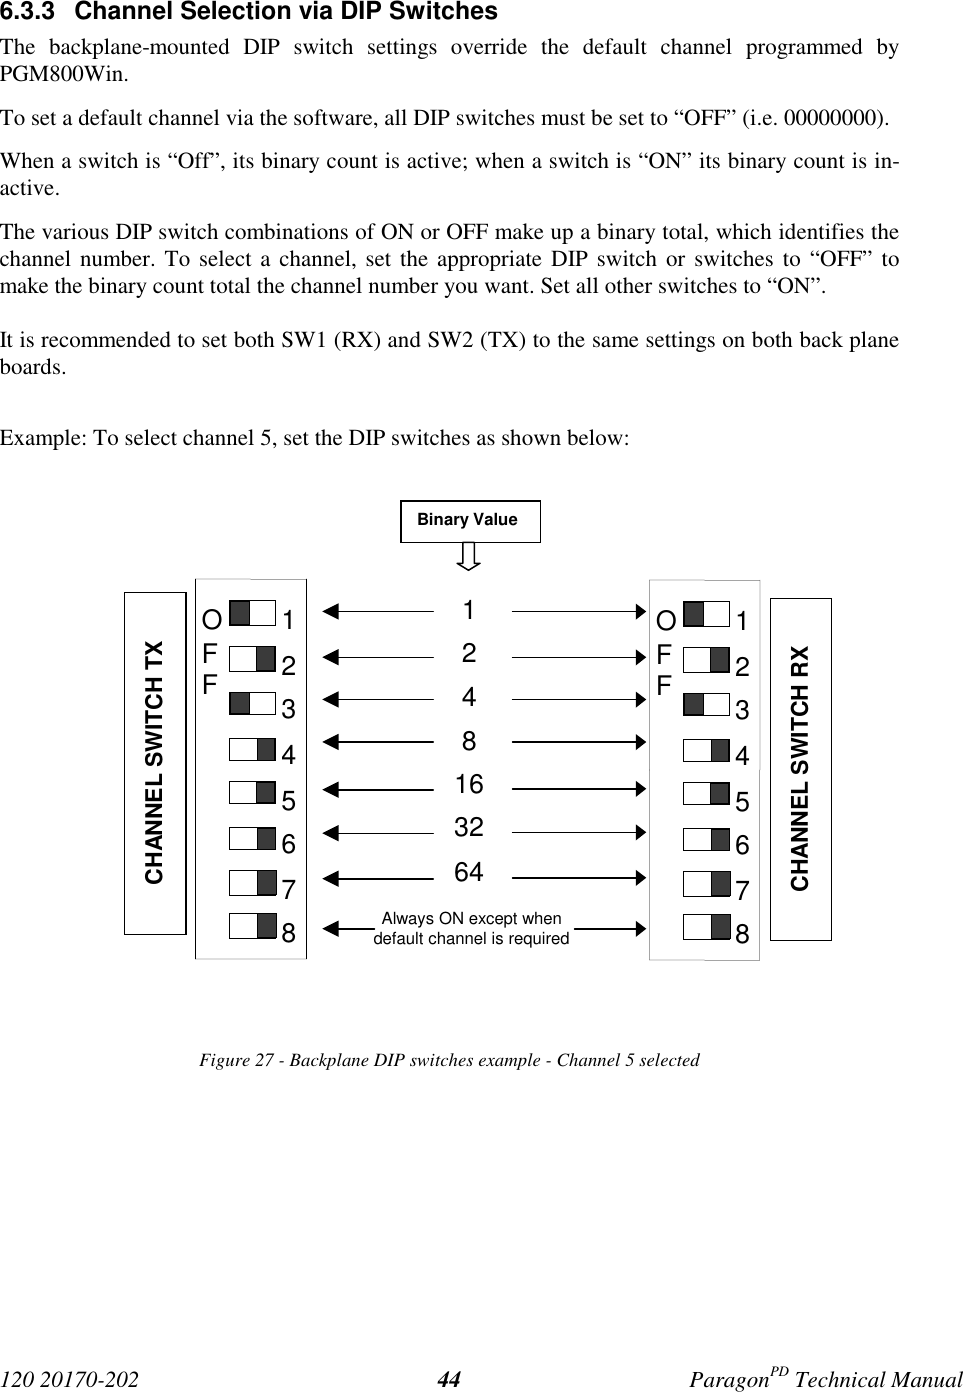 120 20170-202 ParagonPD Technical Manual446.3.3  Channel Selection via DIP SwitchesThe backplane-mounted DIP switch settings override the default channel programmed byPGM800Win.To set a default channel via the software, all DIP switches must be set to “OFF” (i.e. 00000000).When a switch is “Off”, its binary count is active; when a switch is “ON” its binary count is in-active.The various DIP switch combinations of ON or OFF make up a binary total, which identifies thechannel number. To select a channel, set the appropriate DIP switch or switches to “OFF” tomake the binary count total the channel number you want. Set all other switches to “ON”.It is recommended to set both SW1 (RX) and SW2 (TX) to the same settings on both back planeboards.Example: To select channel 5, set the DIP switches as shown below:Figure 27 - Backplane DIP switches example - Channel 5 selectedBinary Value1248163264Always ON except whendefault channel is requiredCHANNEL SWITCH TXCHANNEL SWITCH RX12345678OFF12345678OFF